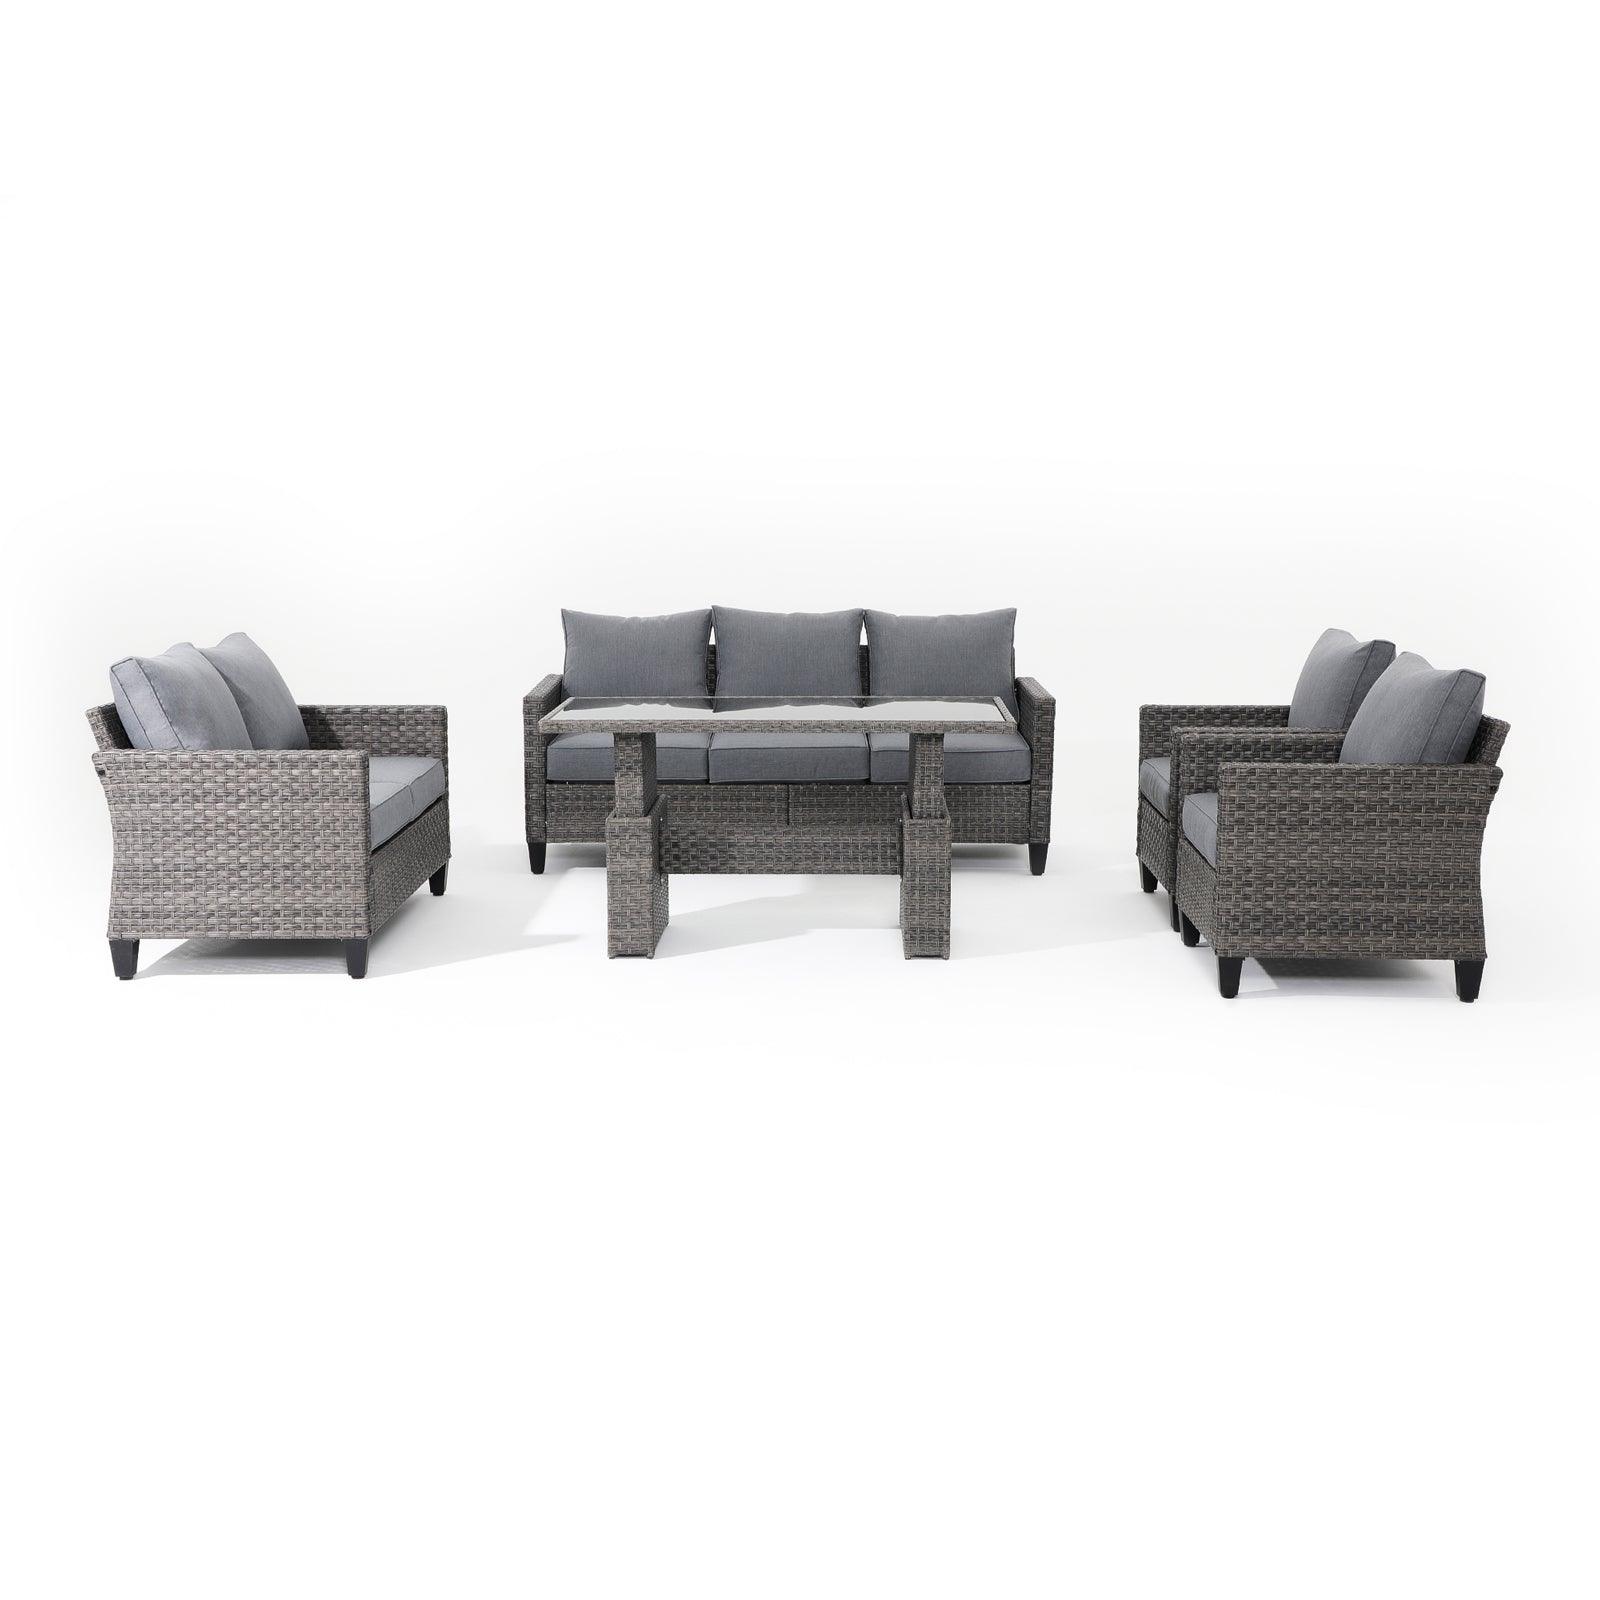 Ayia 5-Piece outdoor Sofa Set with Rattan design, grey cushions, a 3-seater sofa, 2 arm chairs , 1 loveseat, 1 multifunctional lift top dining table, front view - Jardina Furniture #Piece_5-pc#Color_Grey#Style_with Table